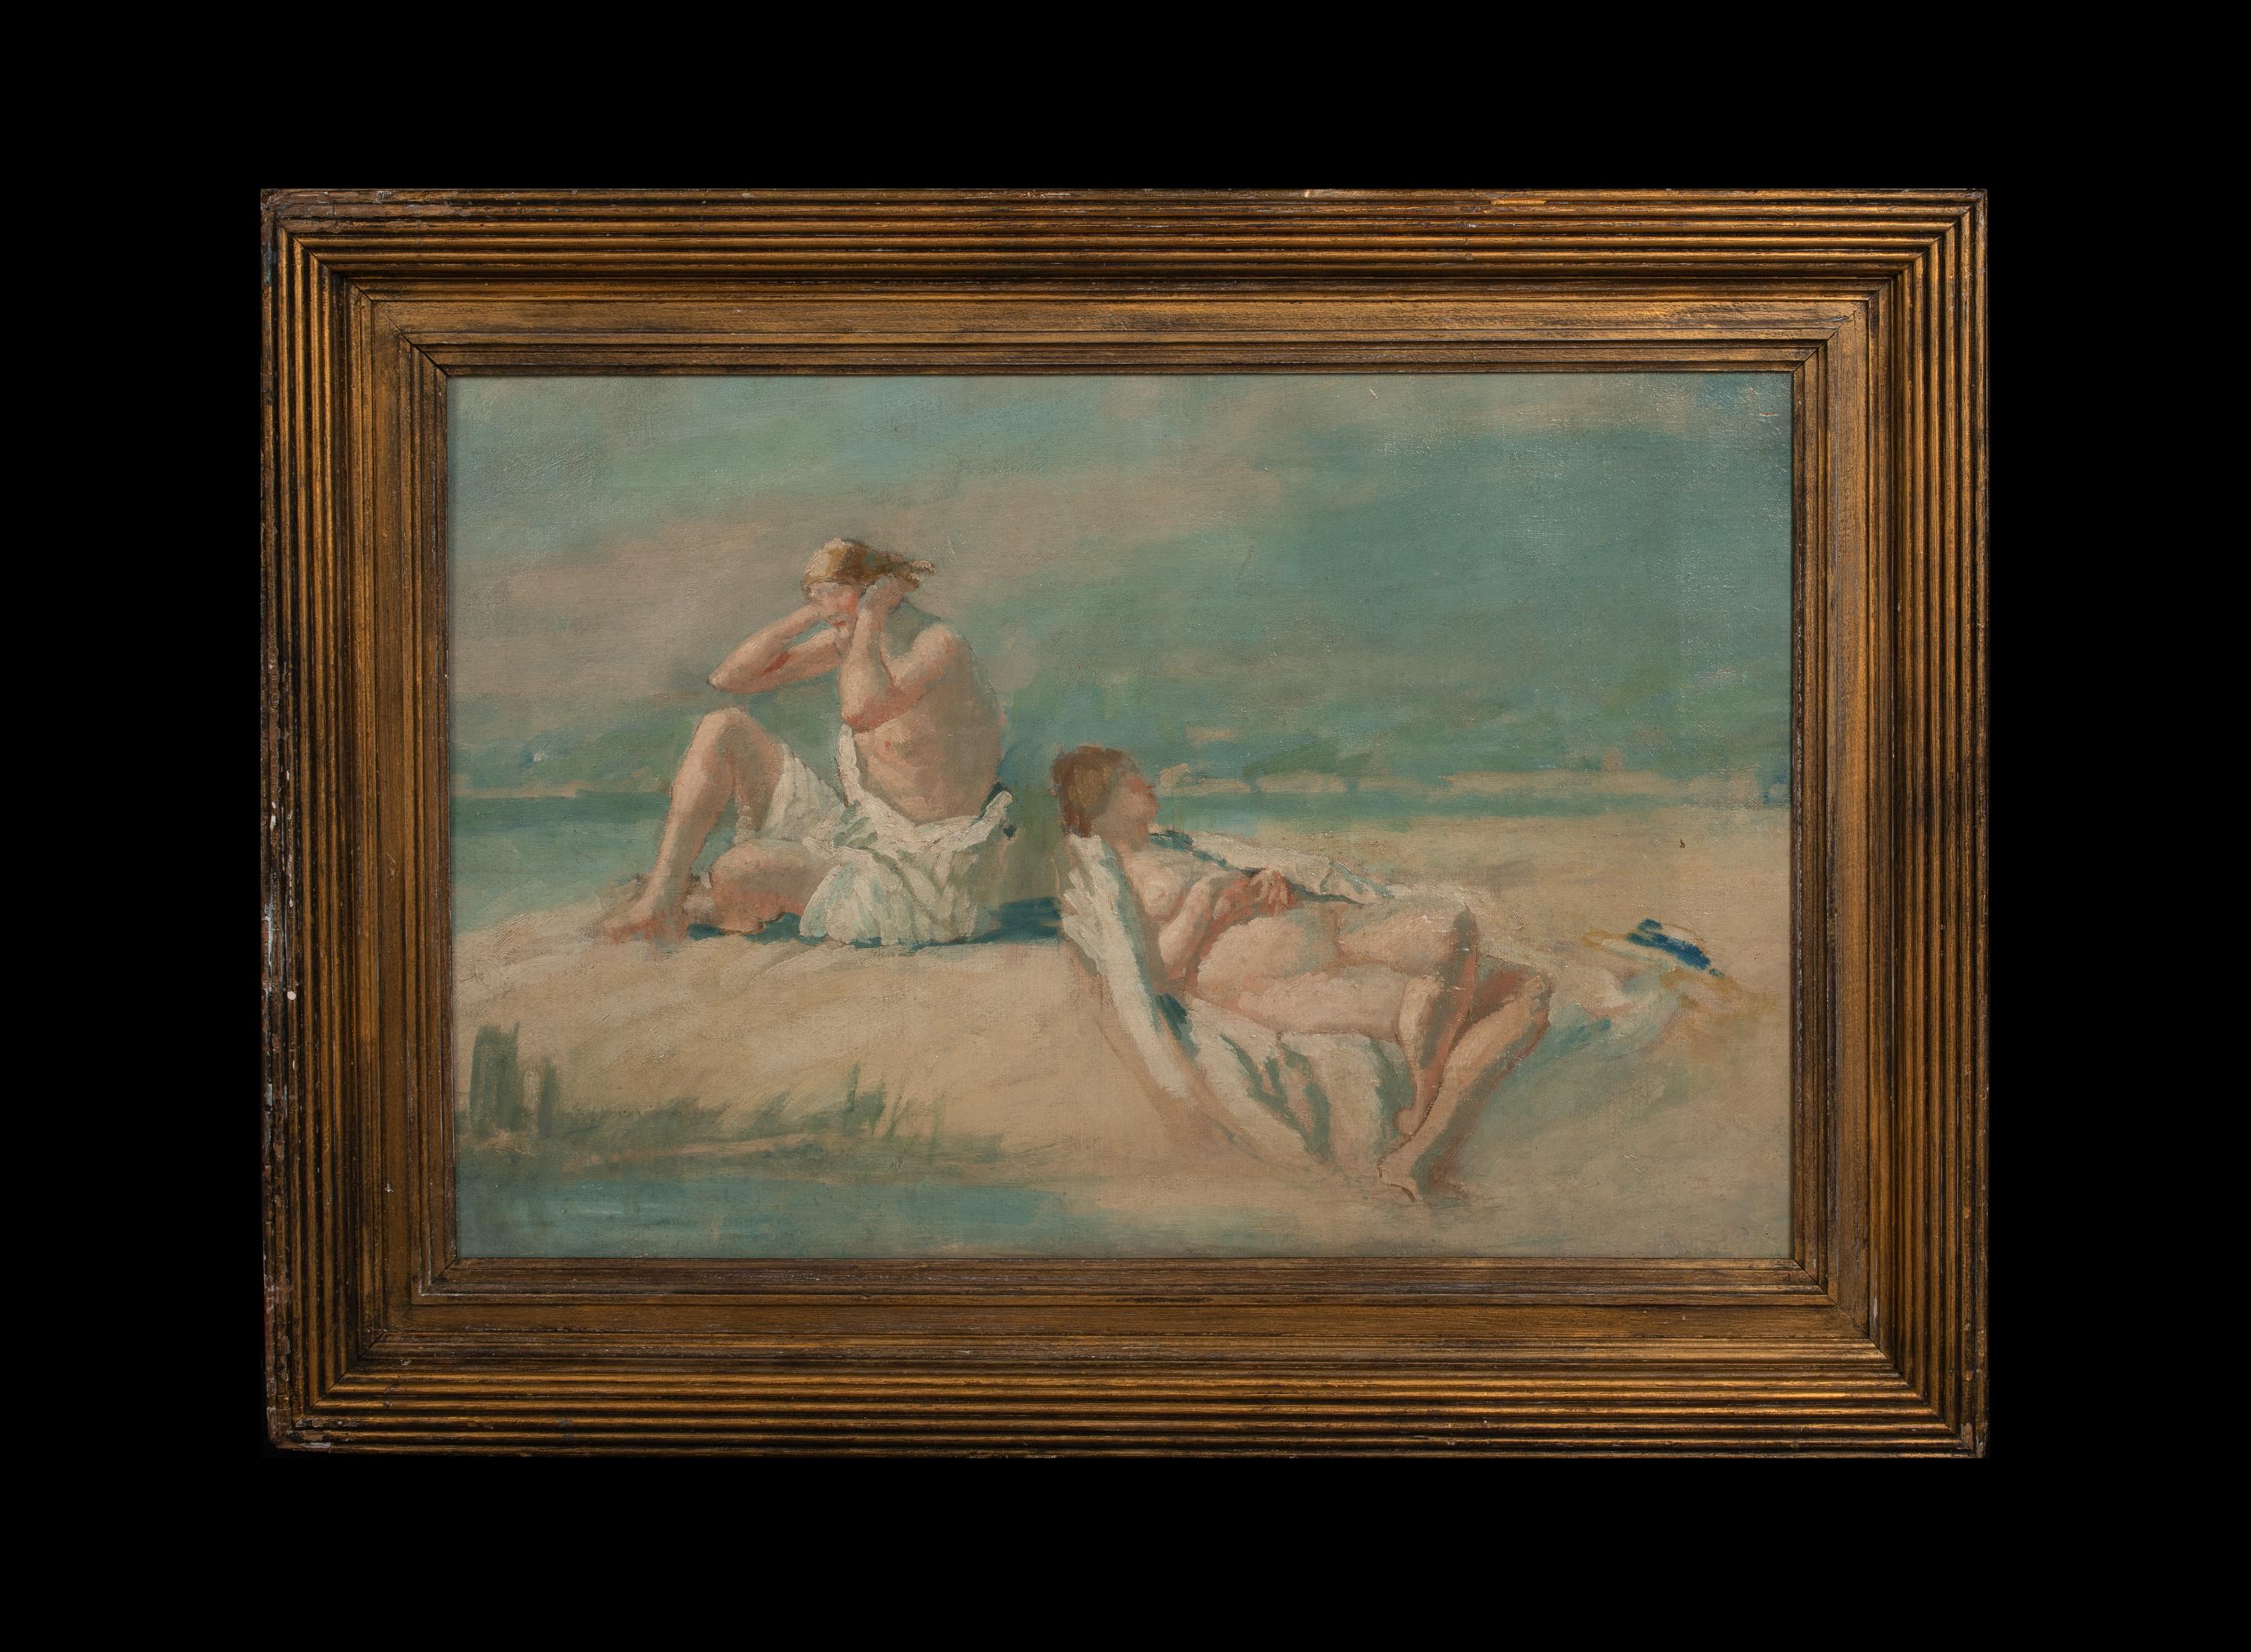 Nudes Sunbathing On A Beach, 19th Century  circle of PHILIP WILSON STEER - Painting by Unknown